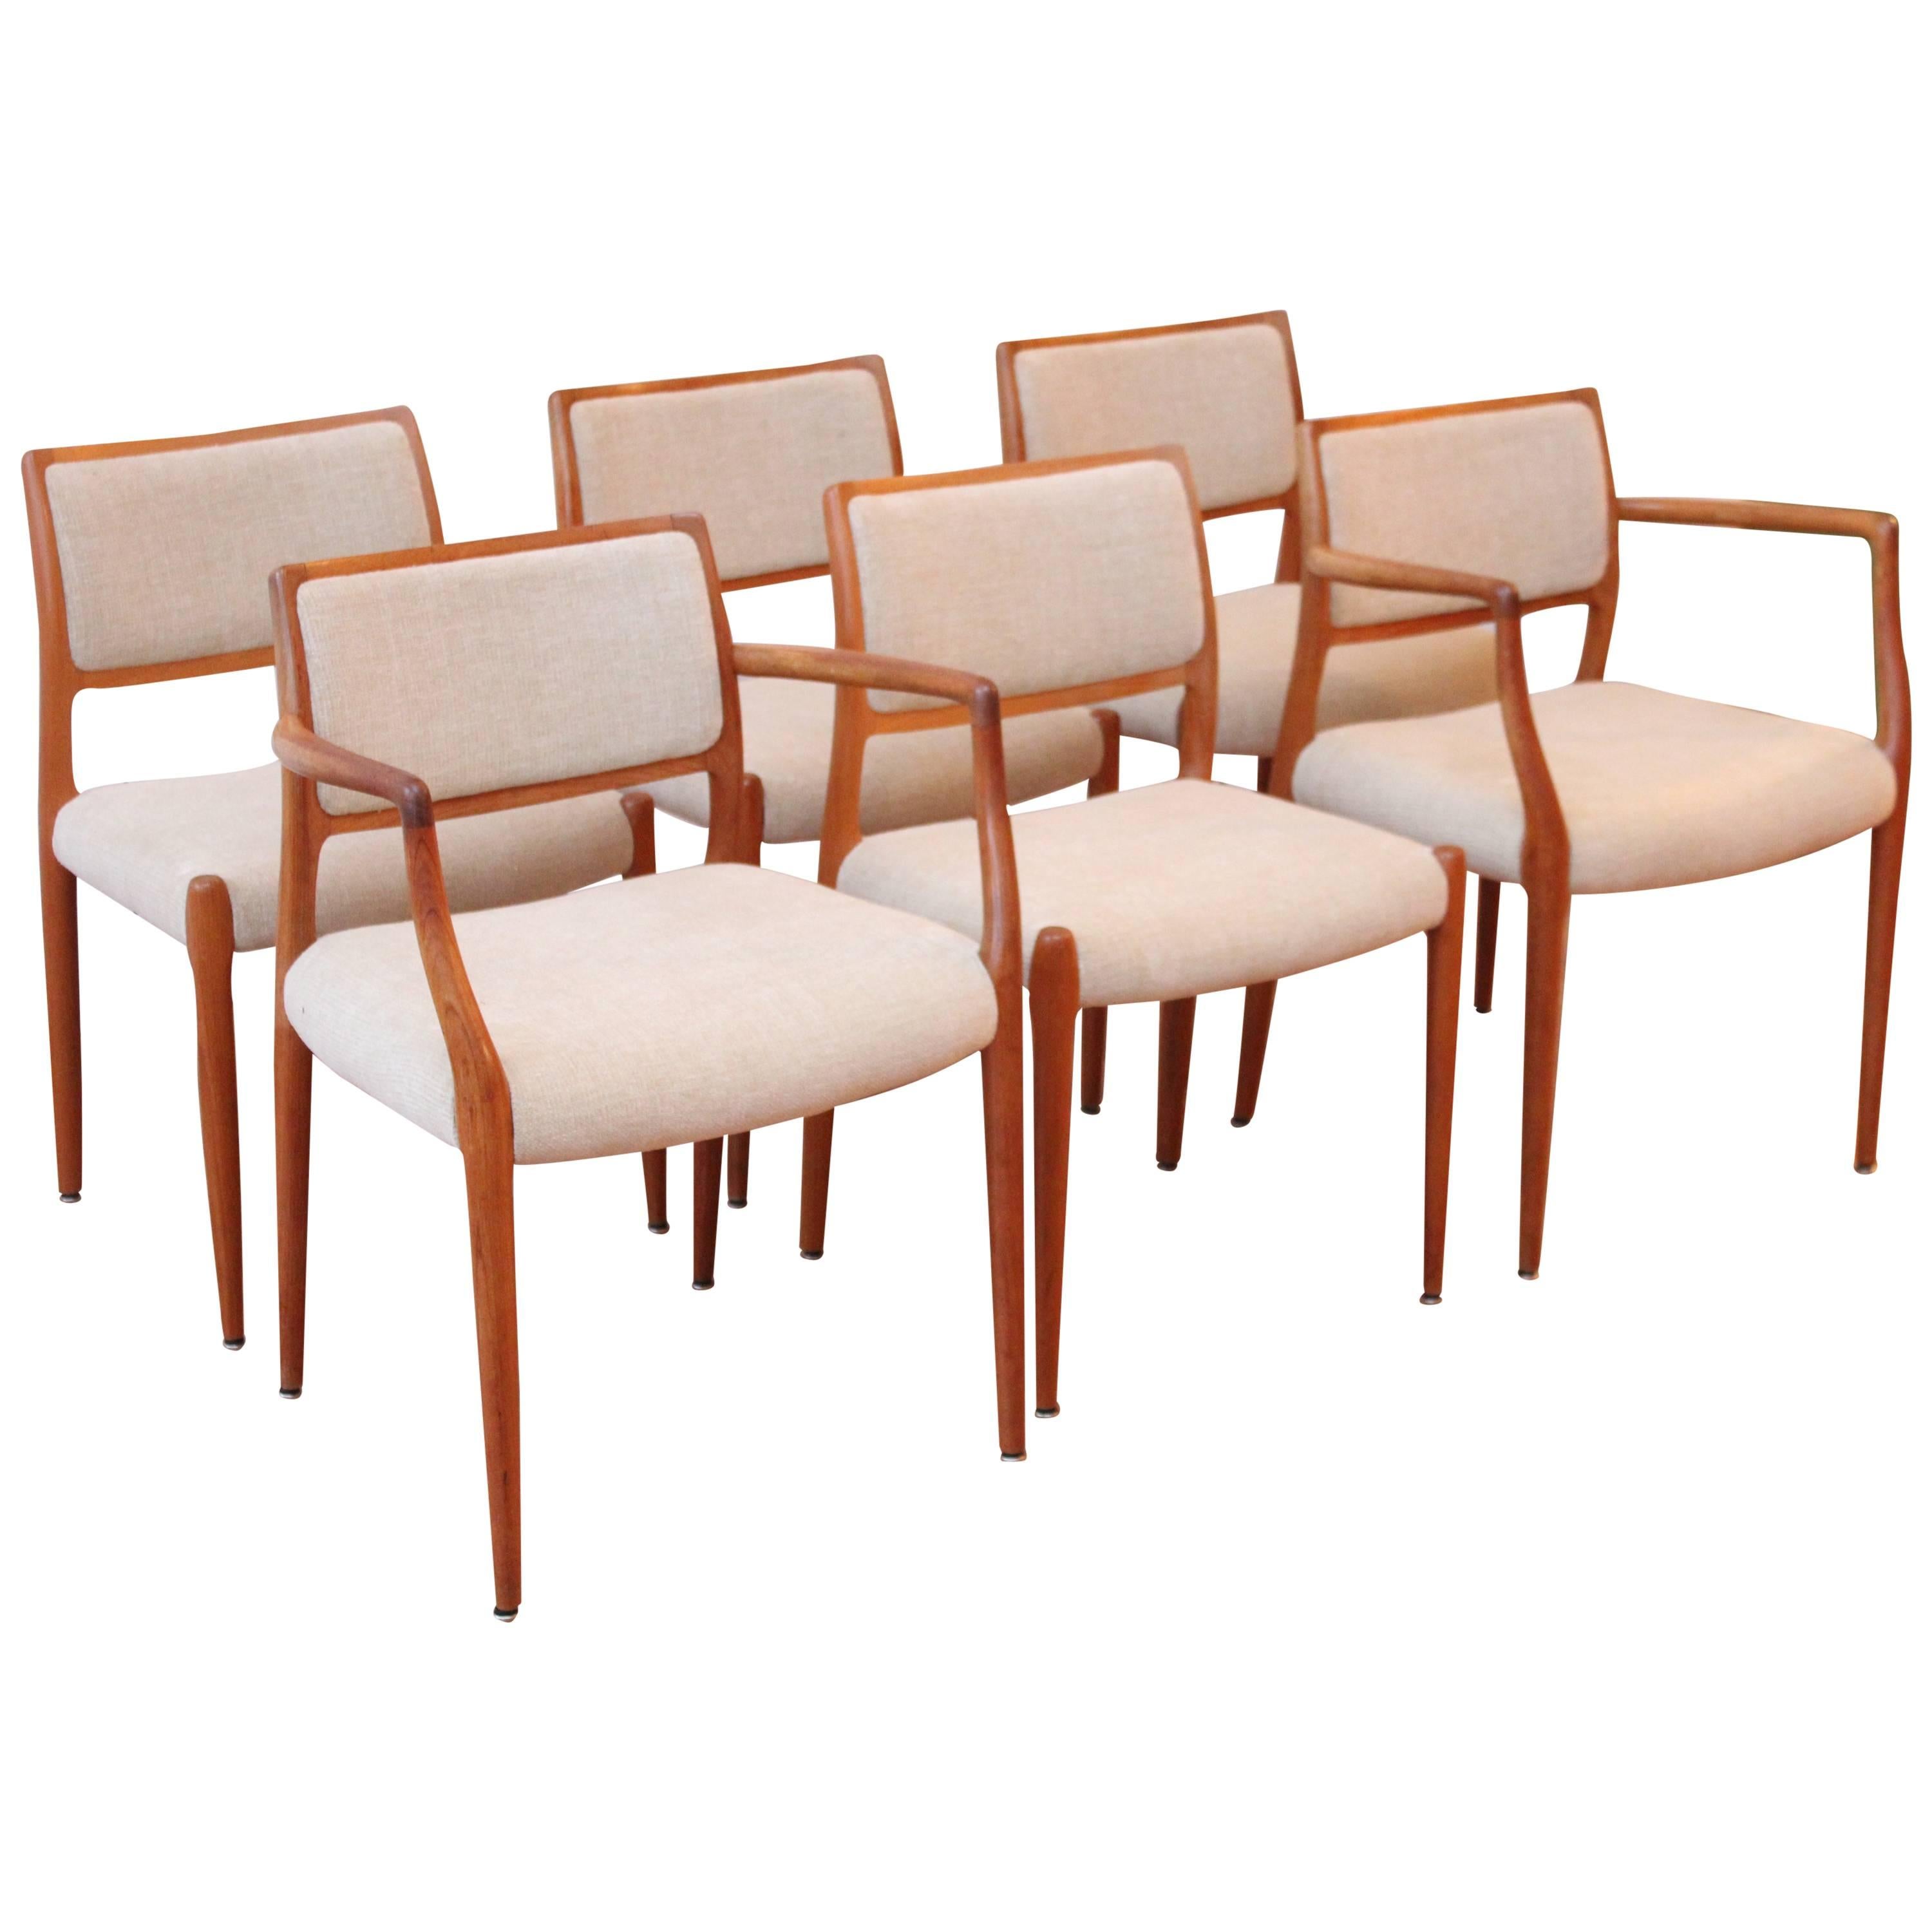 Six Danish Modern Dining Chairs by Niels Otto Møller